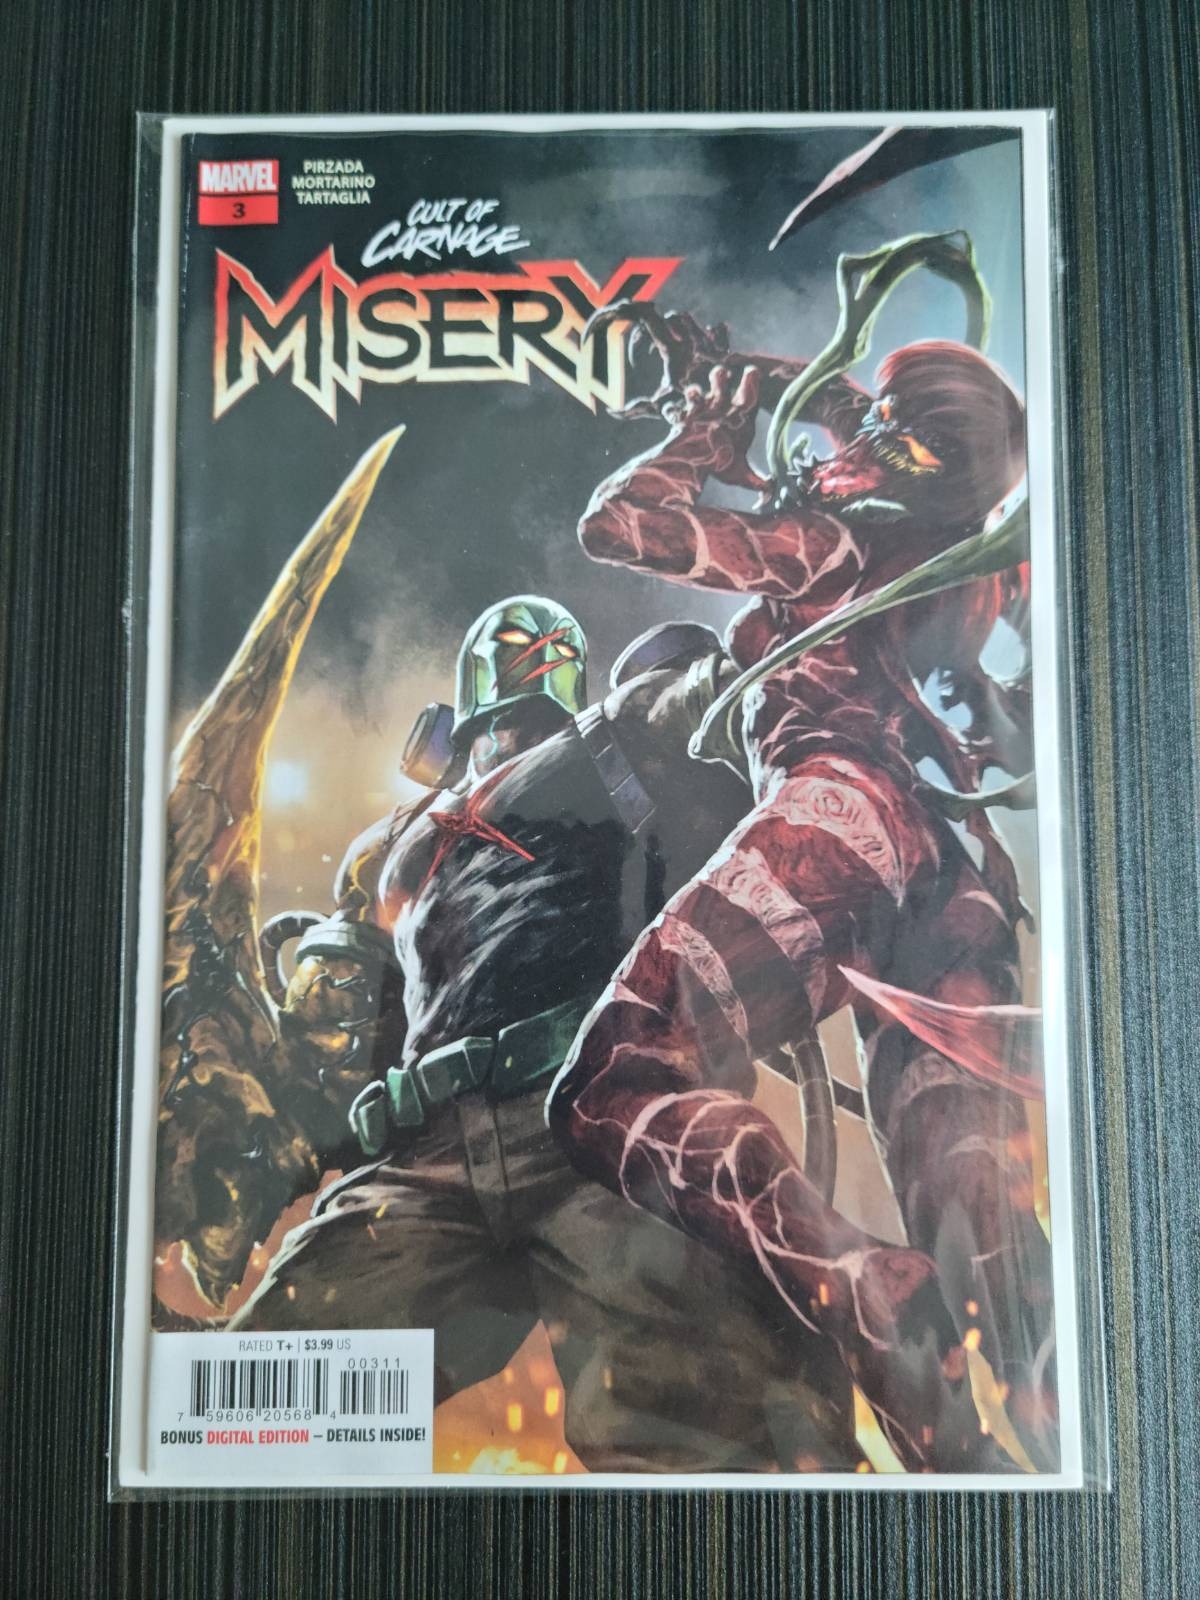 Cult of Carnage: Misery #3